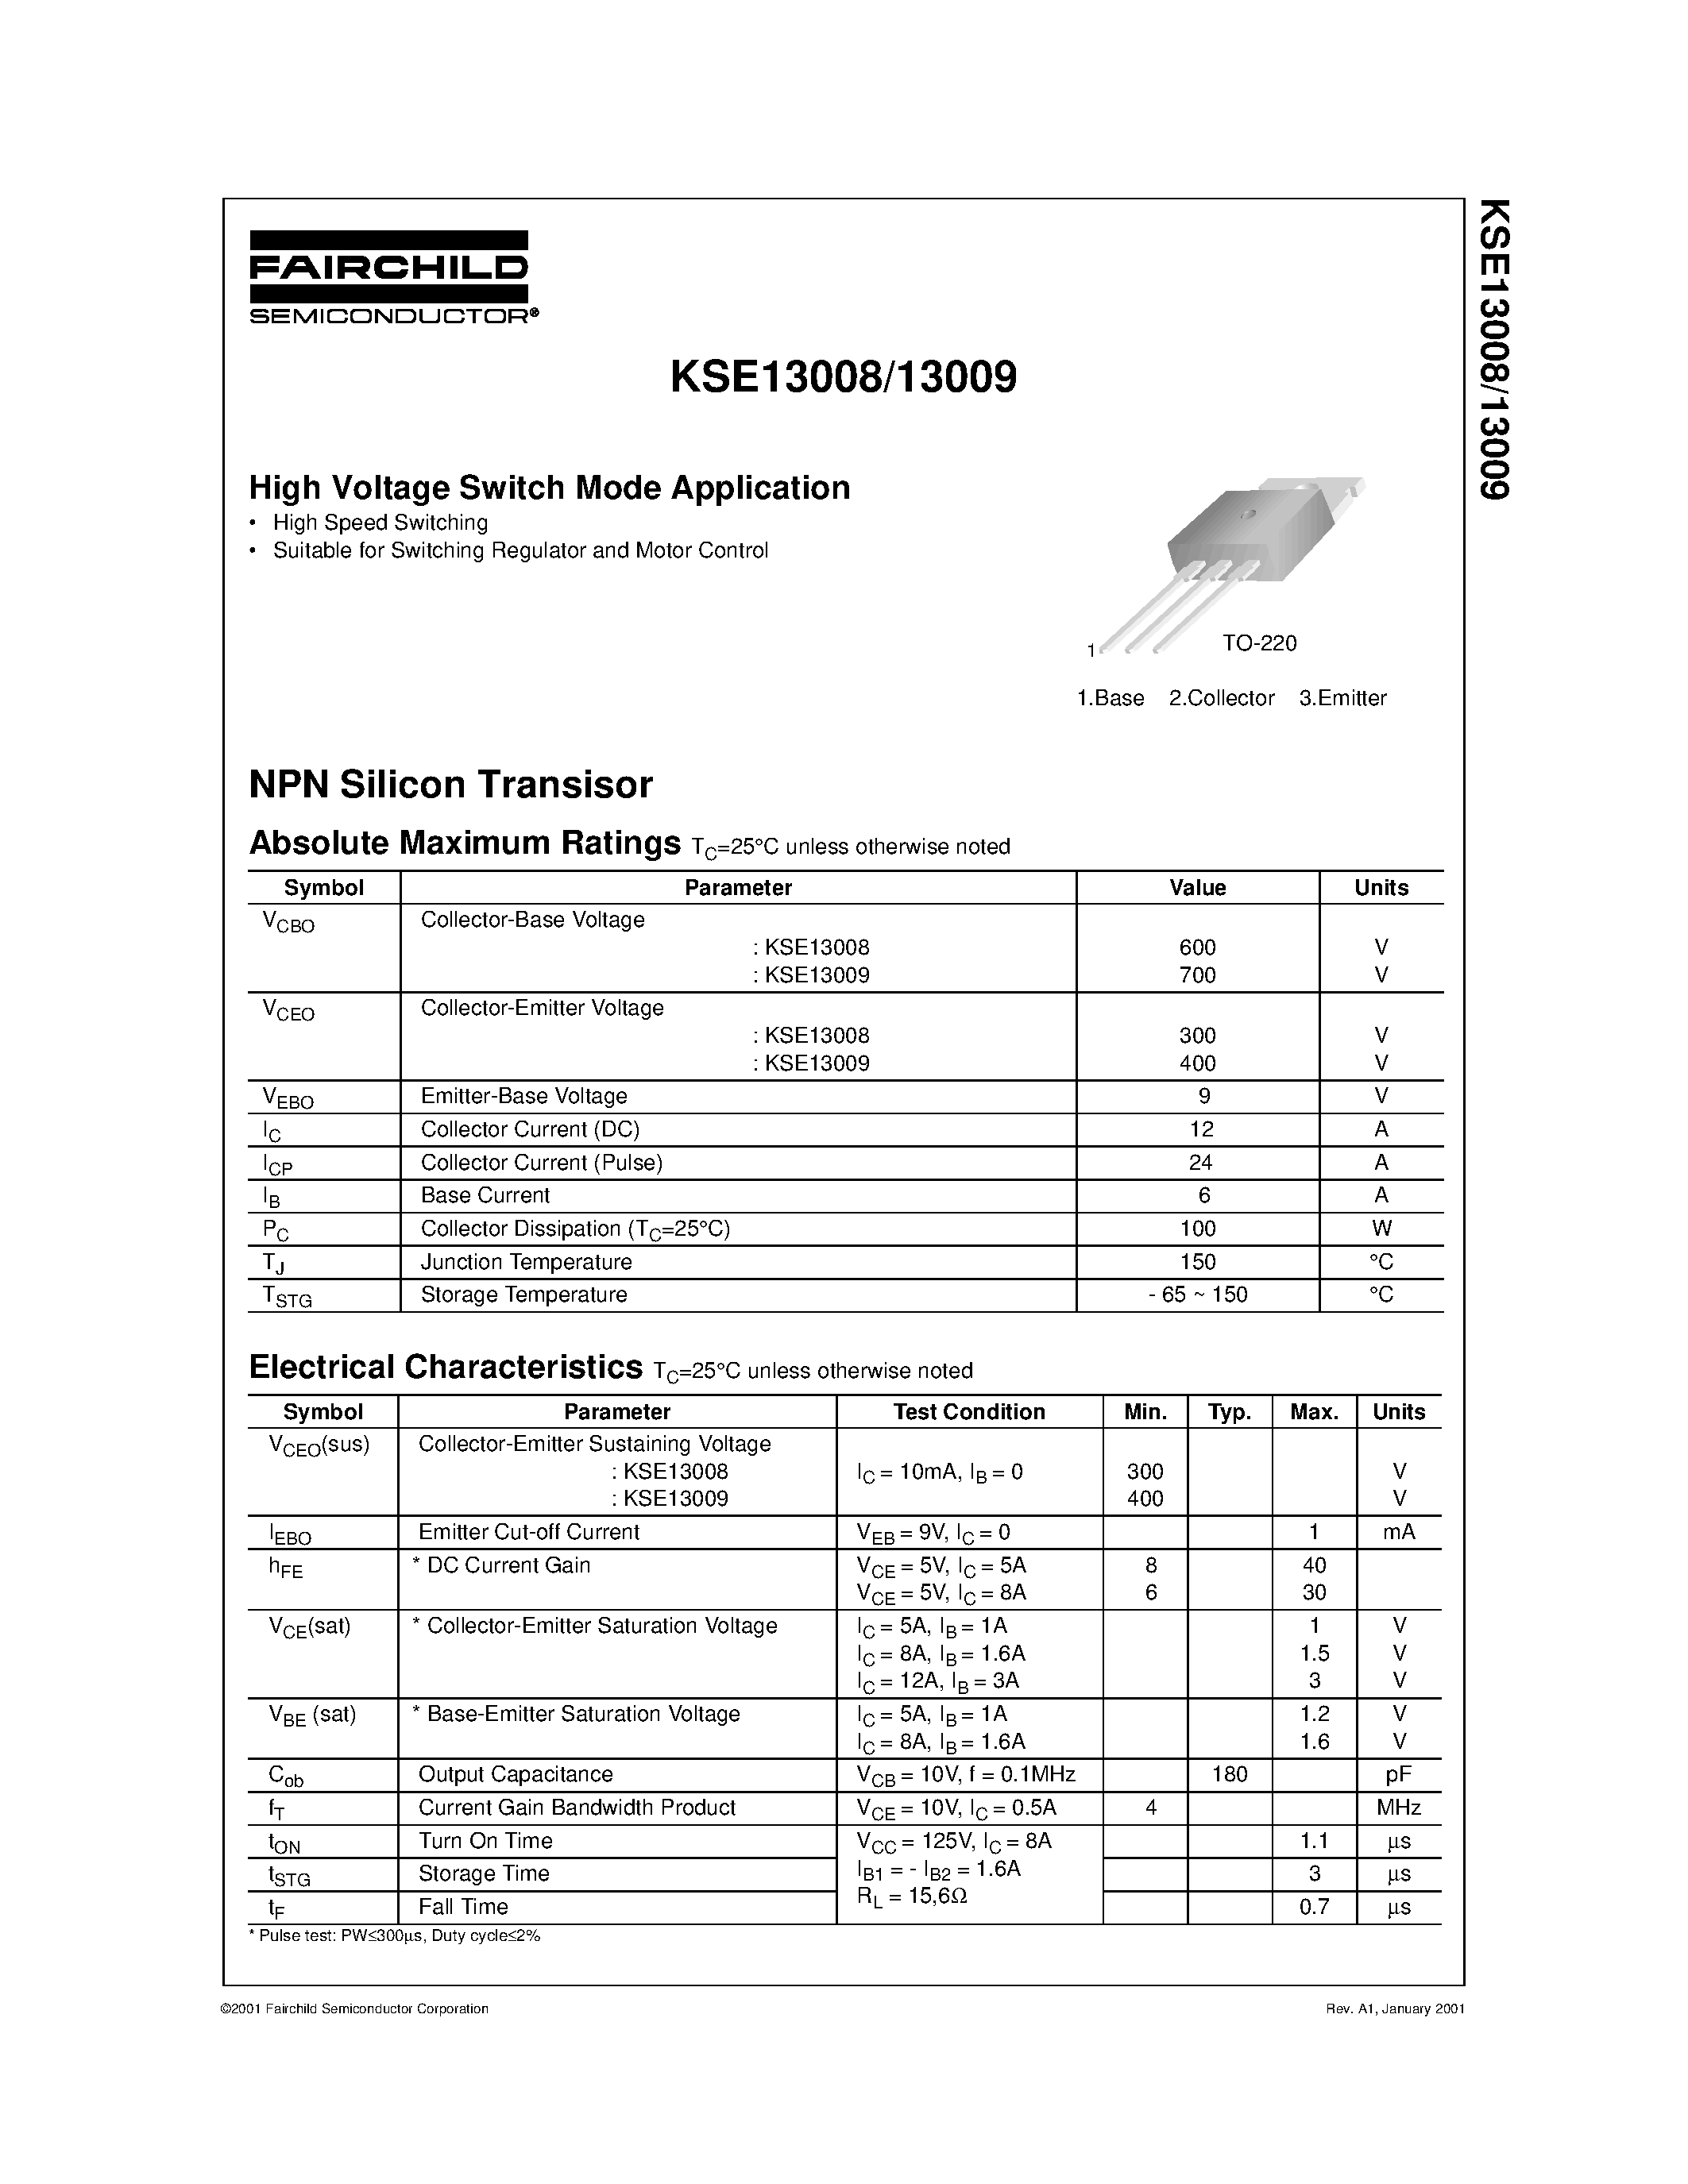 Datasheet KSE13009 - High Voltage Switch Mode Applications page 1